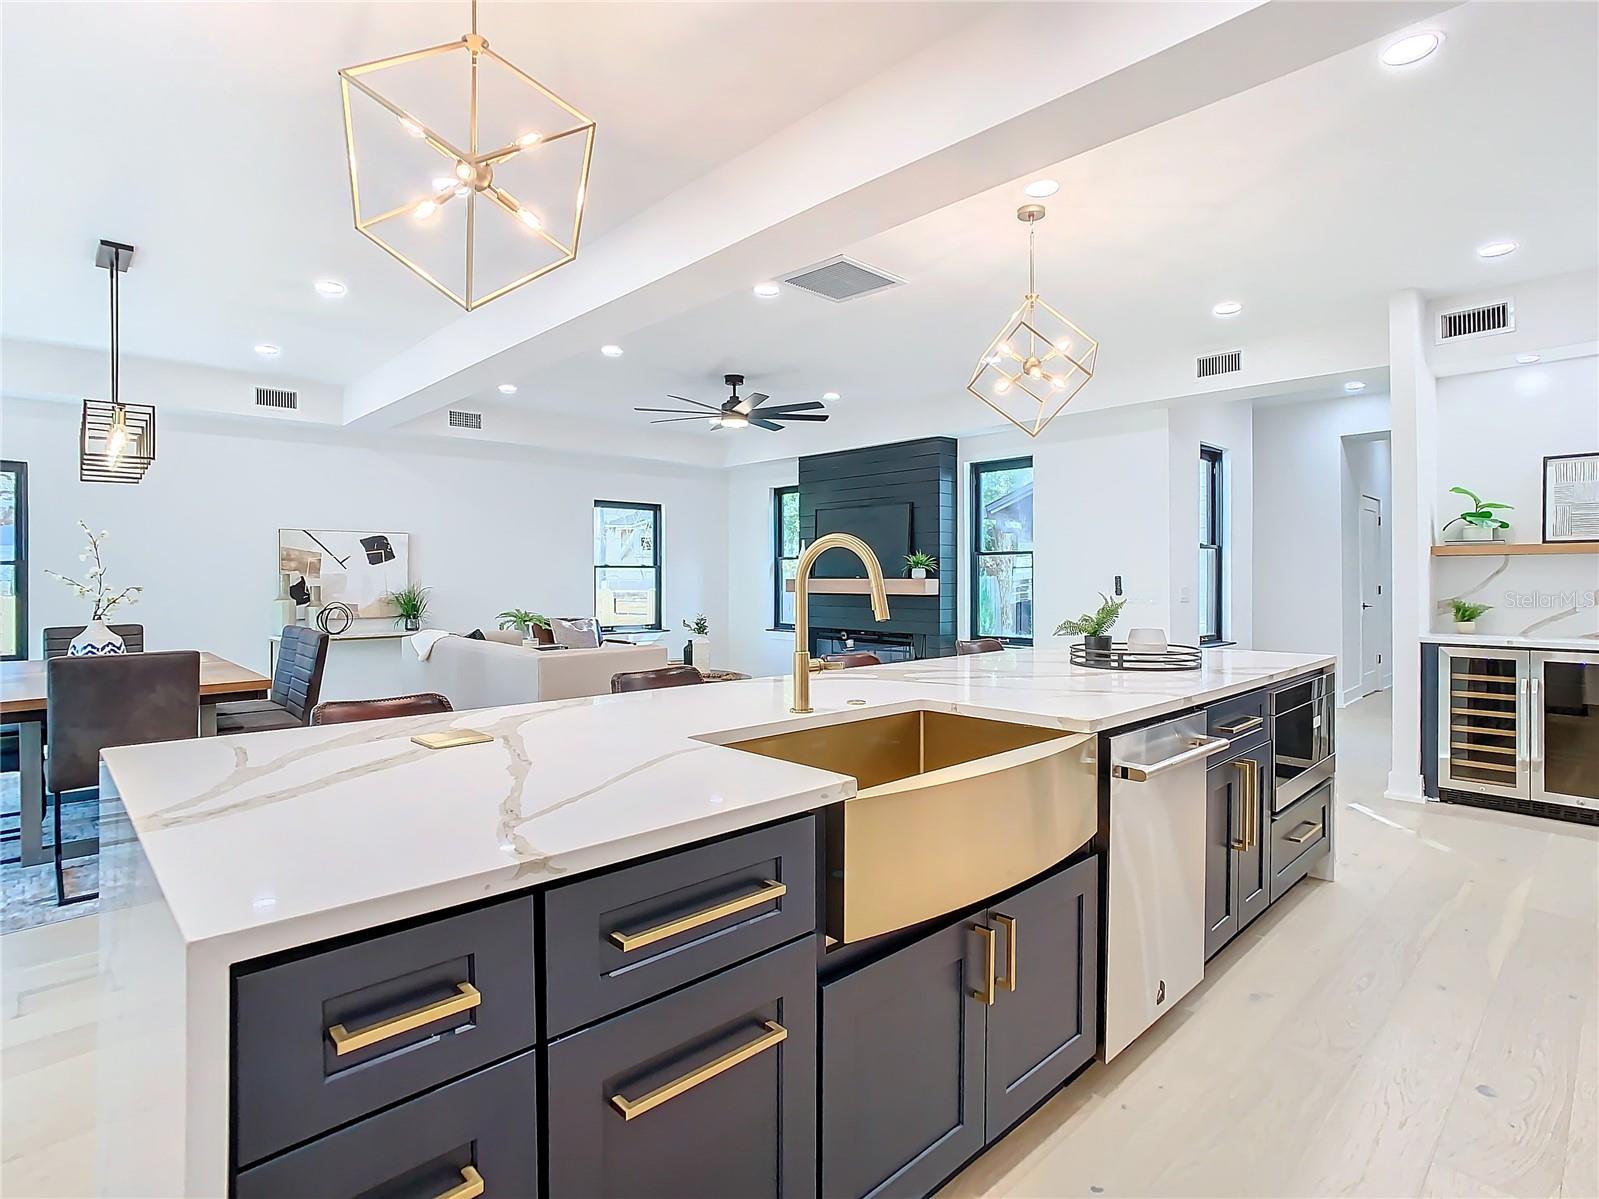 Chef kitchen with two-tone cabinetry, Jenn-Aire double ovens, below island microwave, two-tone soft close, hardware upgrades plus lighting, and vanishing USB charging stations set inside calacatta quartz counters, Floating Farm Sink and luxury lighting upgrades